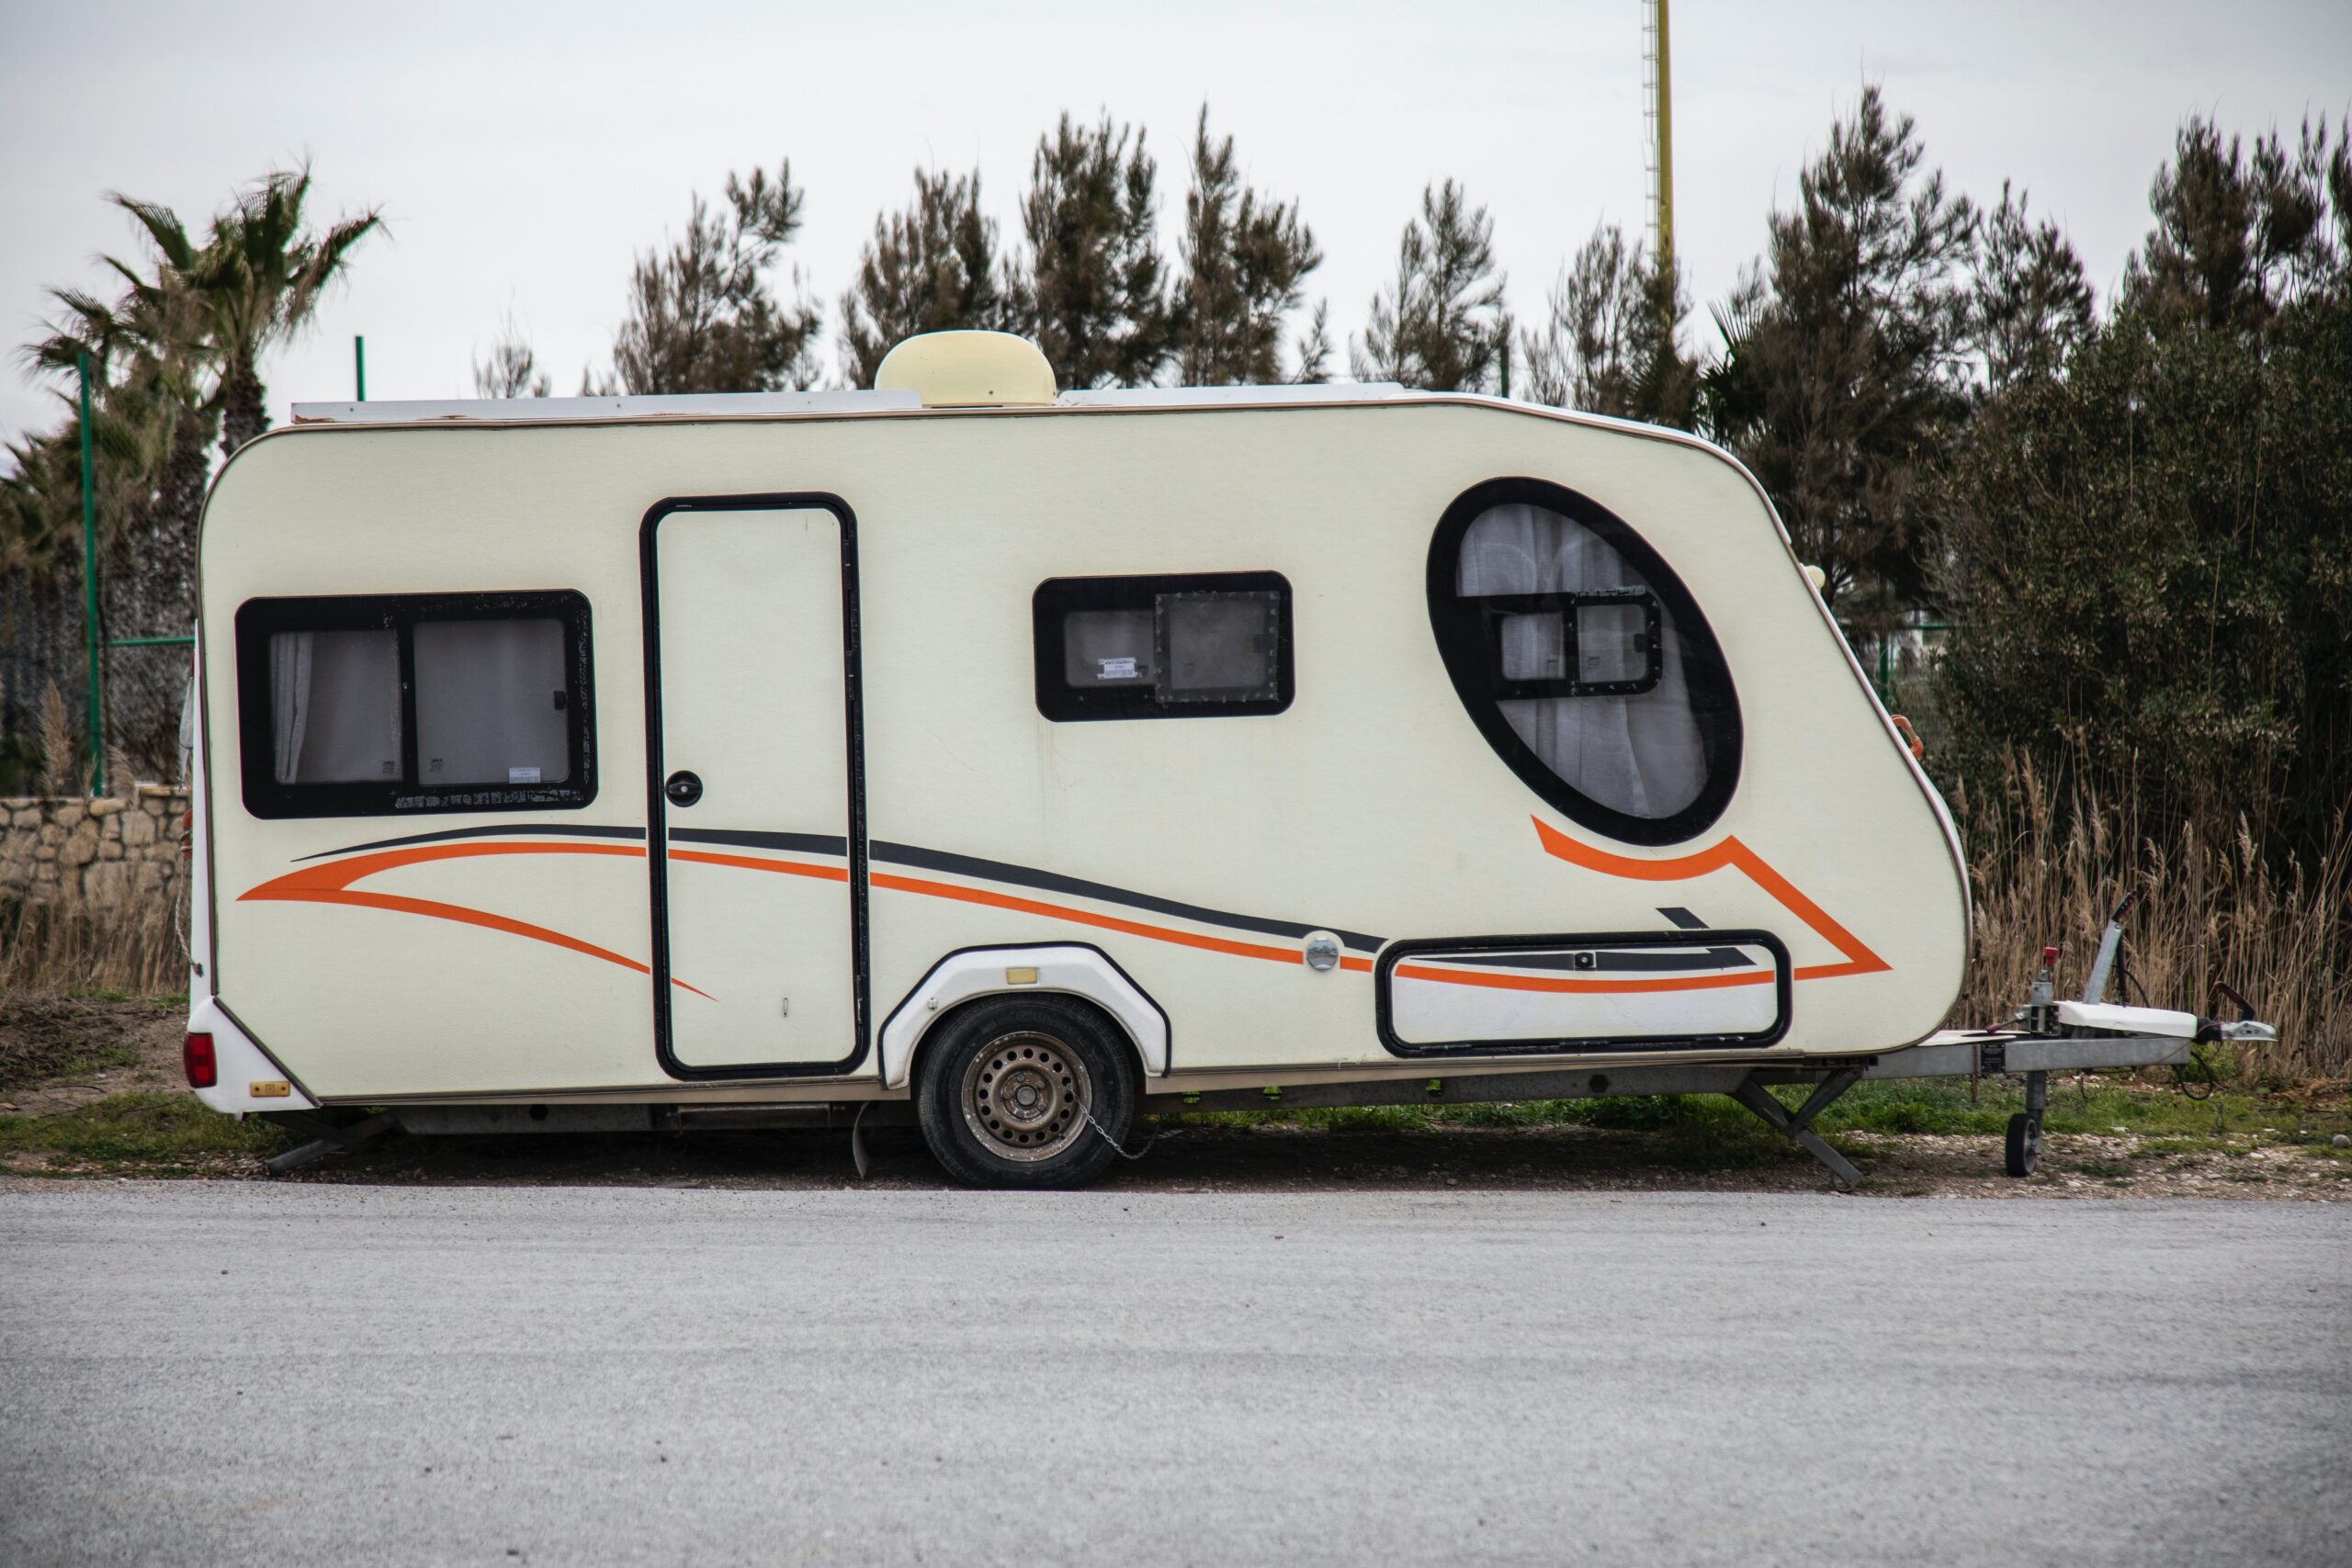 The Top Travel Trailer Sizes for Solo Couple and Family Adventures